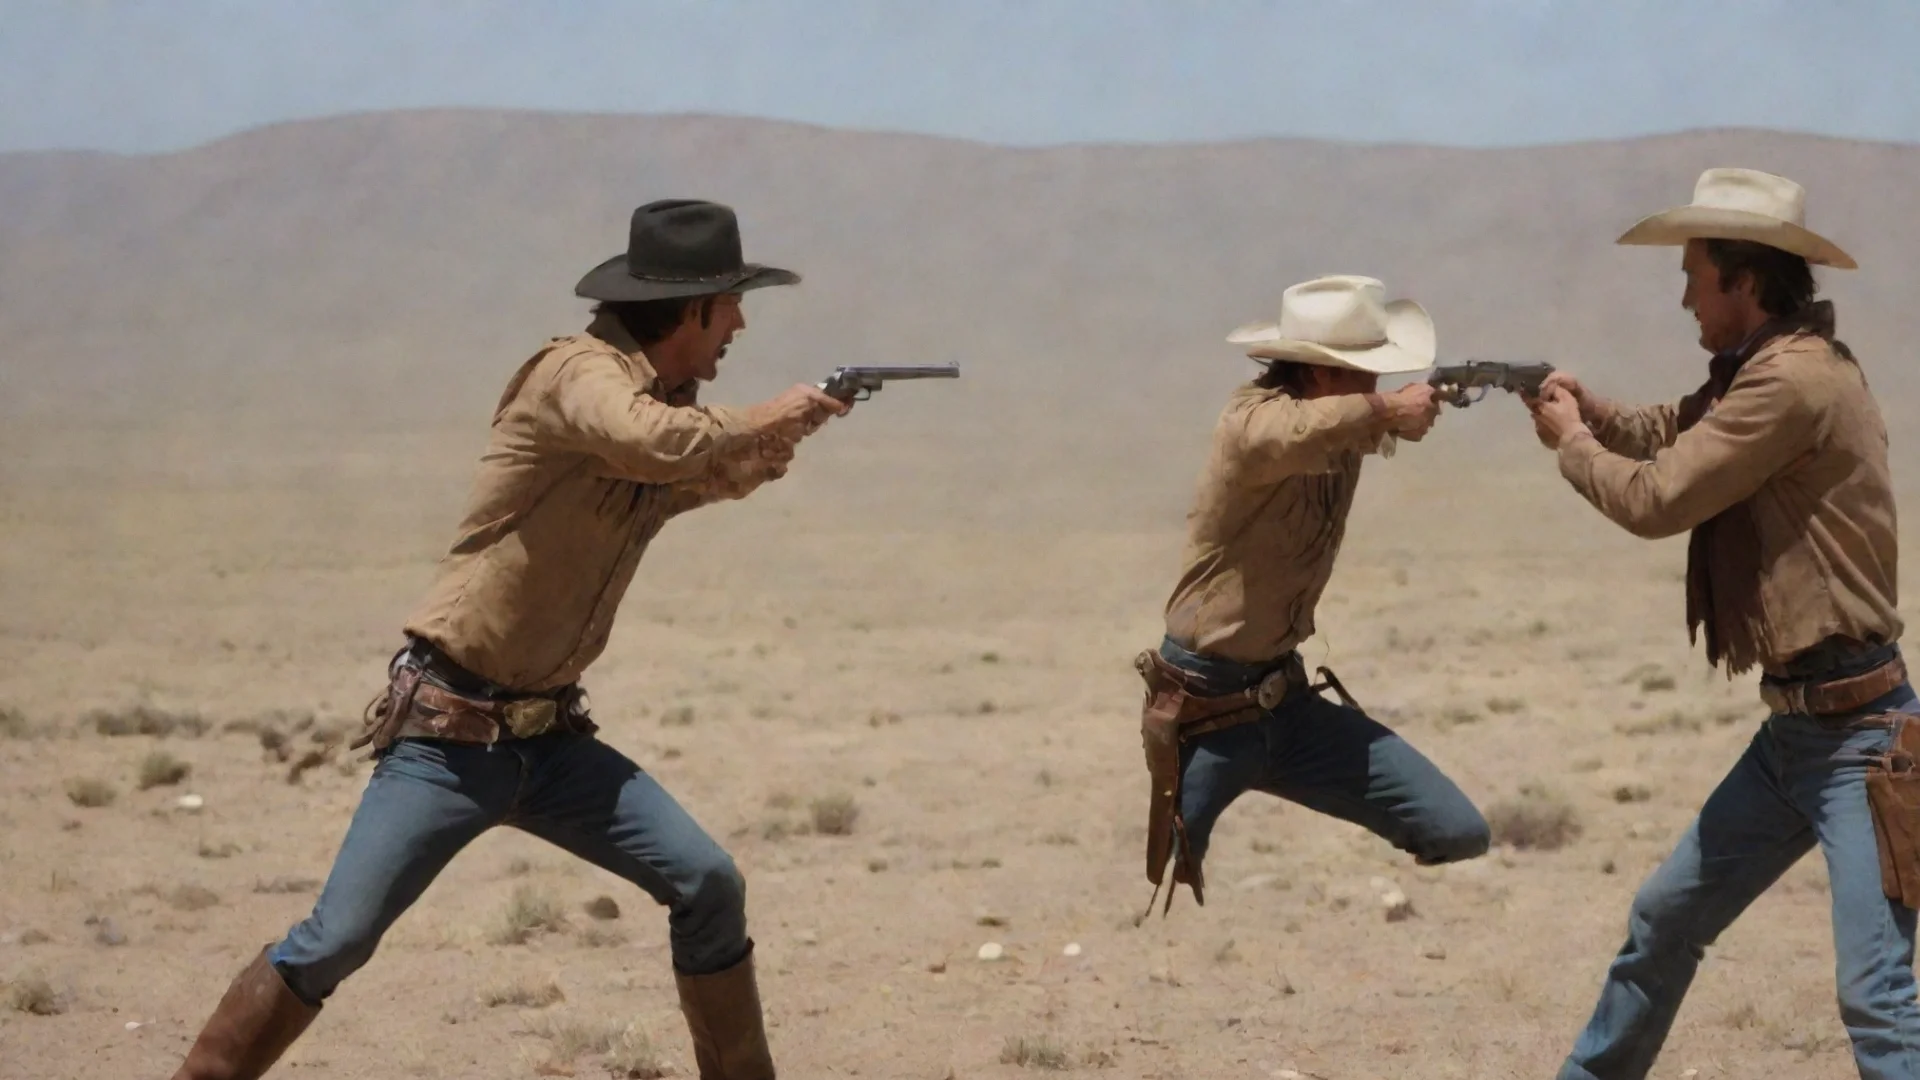 amazing two cowboys having a gun duel awesome portrait 2 wide